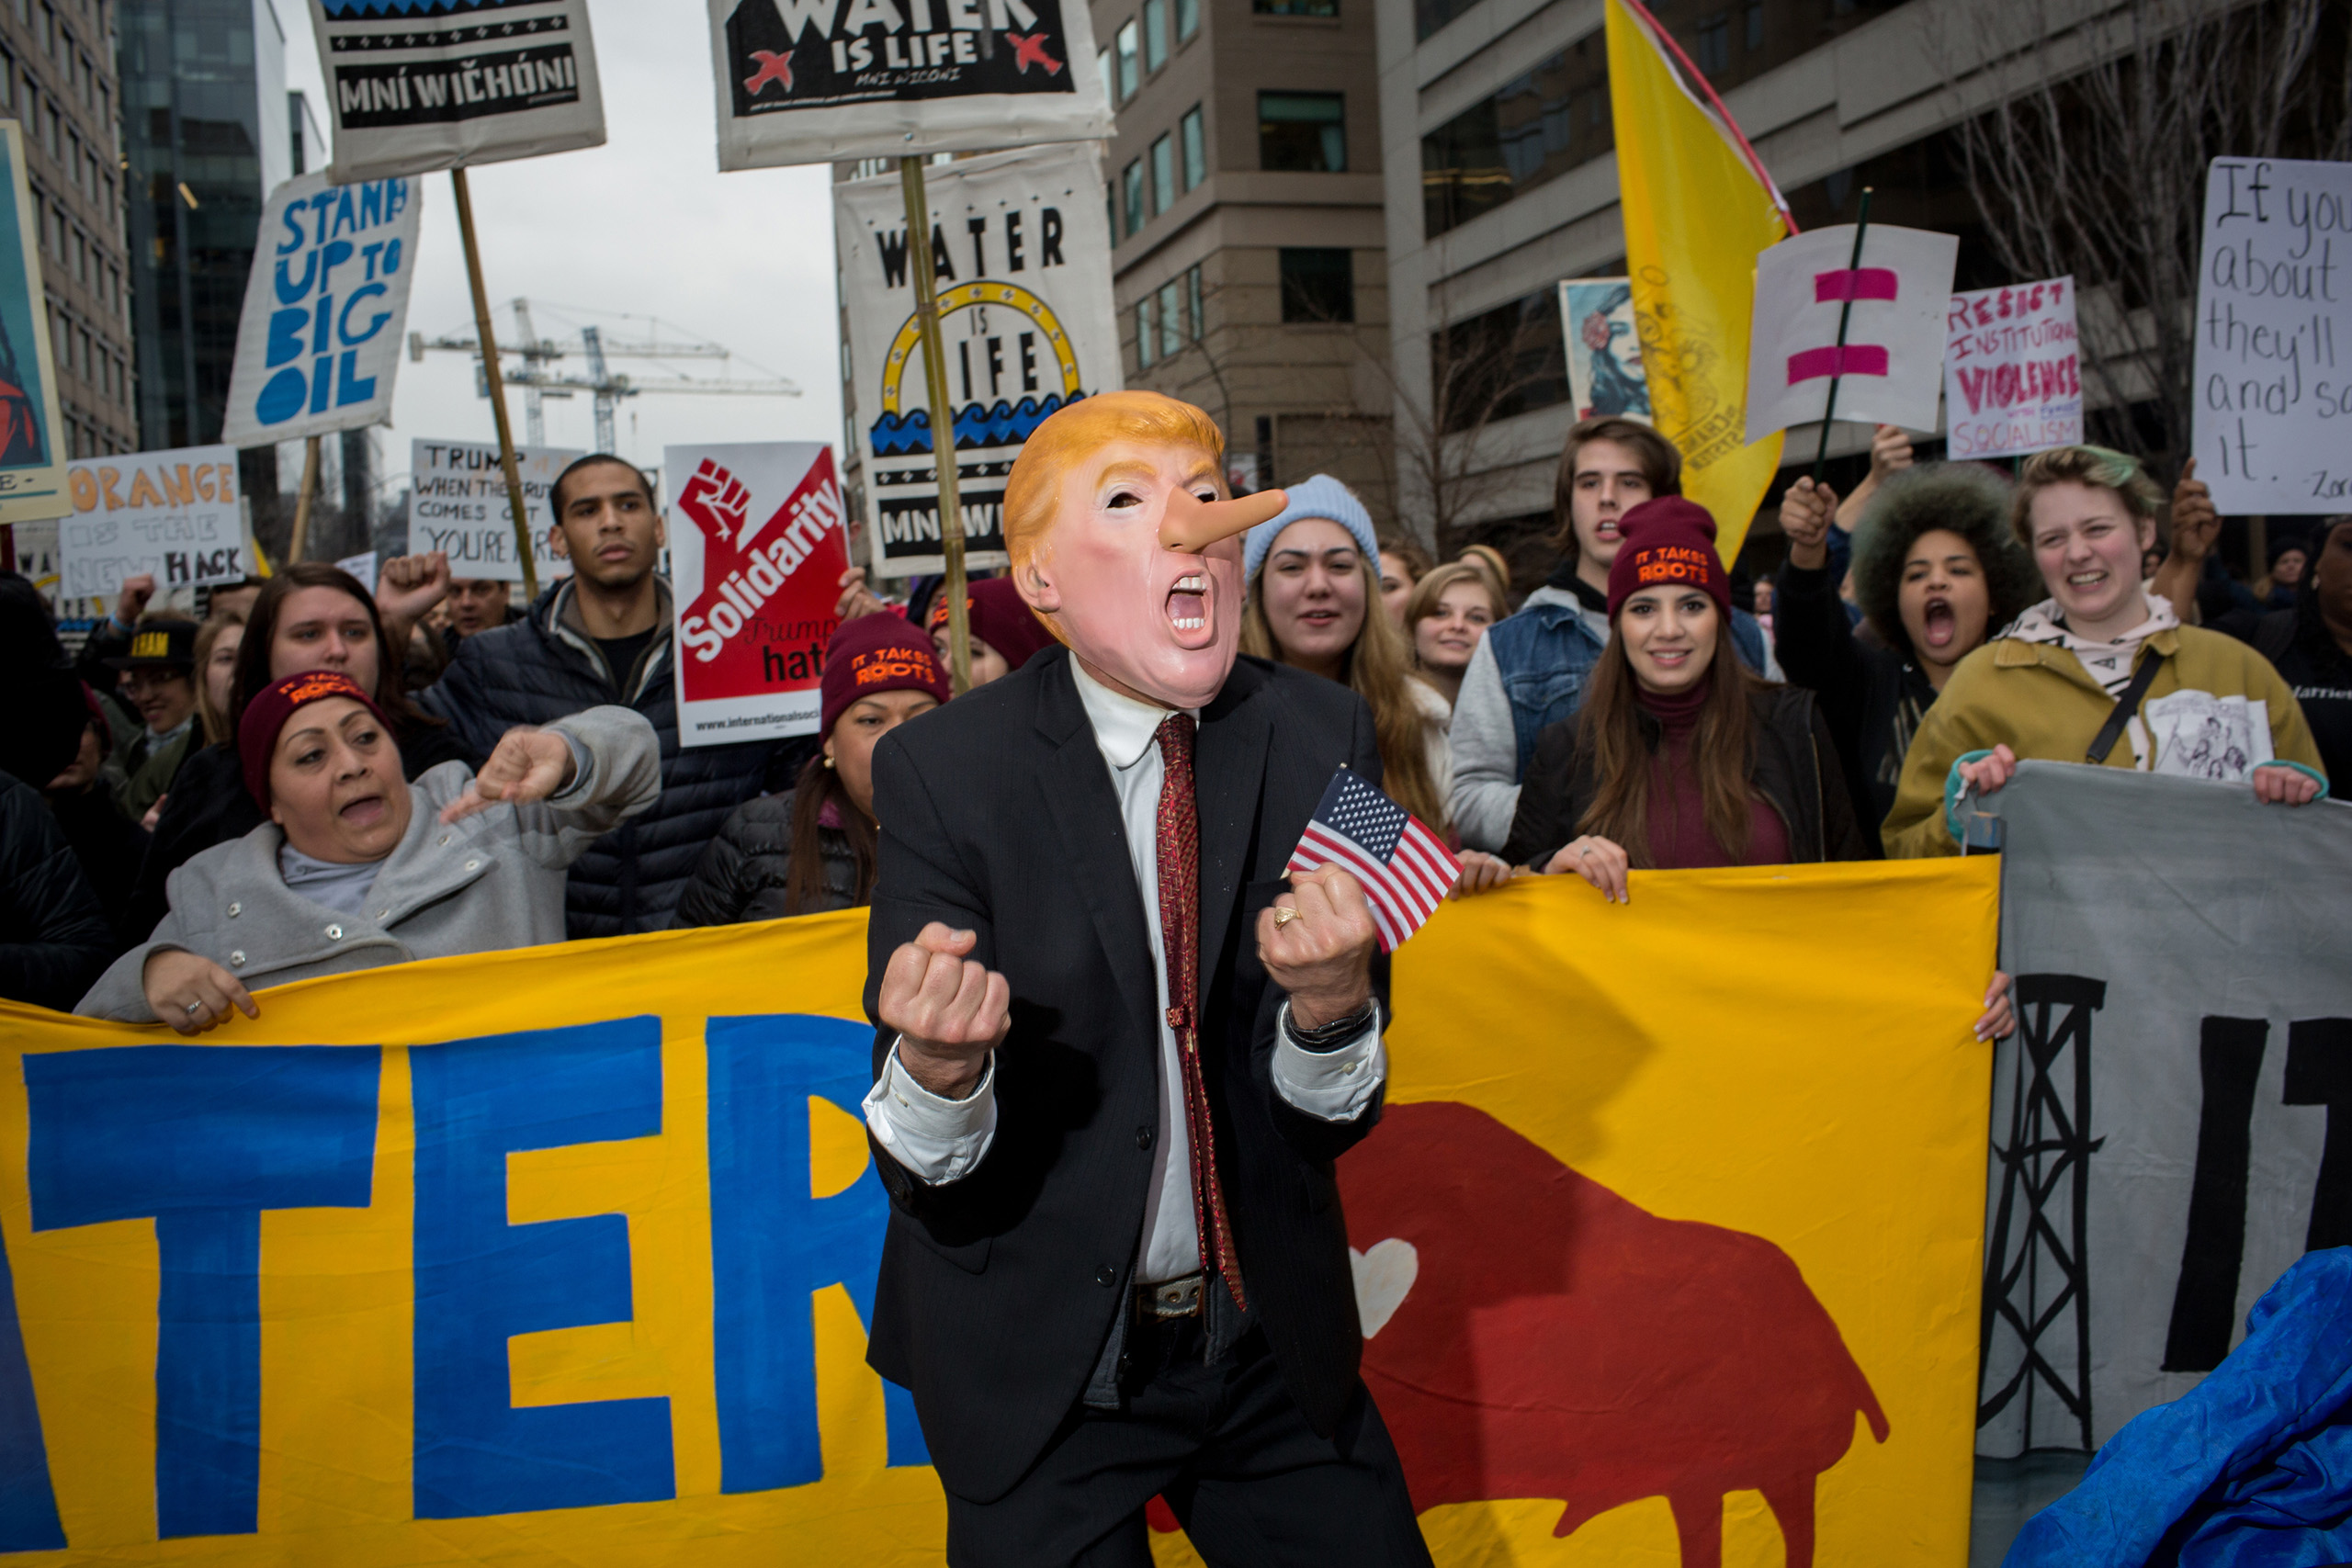 Protesters demonstrate on the streets of Washington on Inauguration Day, Jan. 20, 2017.